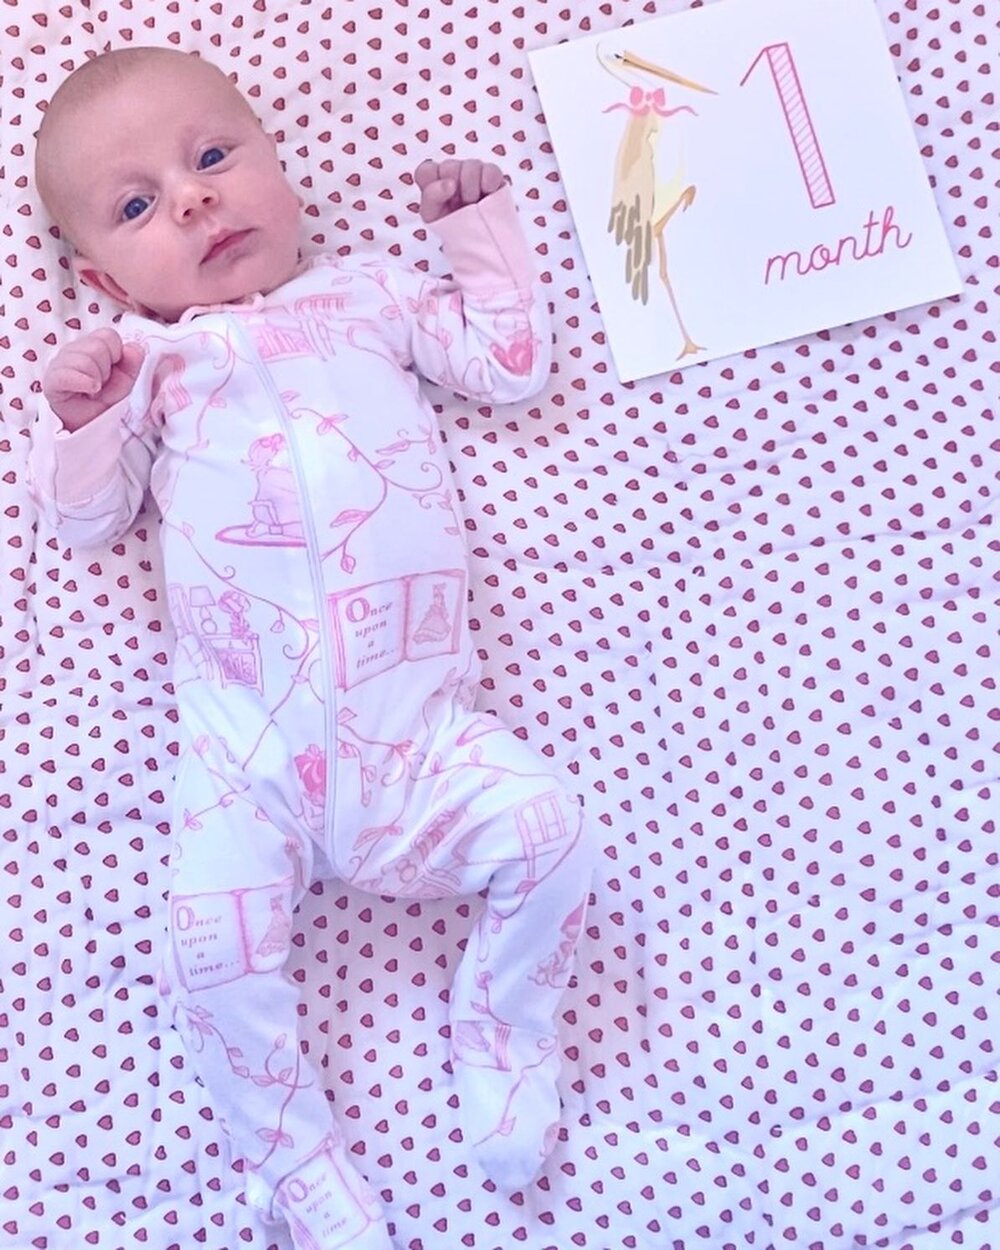 One month with our girl!!

🎀Hadley Jane Kilgore🎀
Born 1/06/22 at 6:06 pm 
 8# 10 oz

Our sweet little lady joined us on epiphany/manifesting day and we have been floating ever since. Her energy is so calm and sweet and she loves sleep as much as he